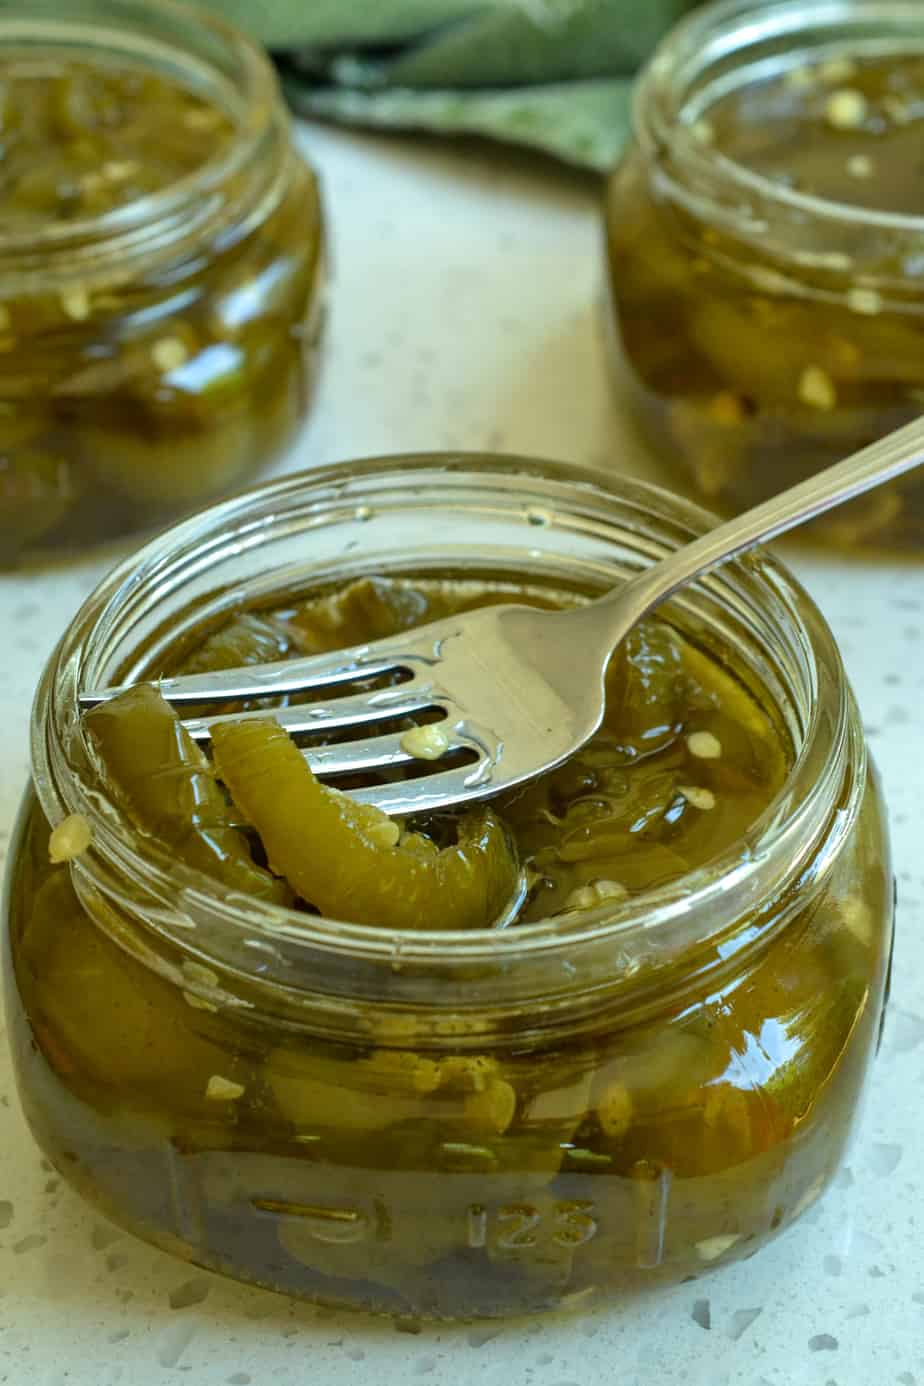 A small jar full of candied jalapenos